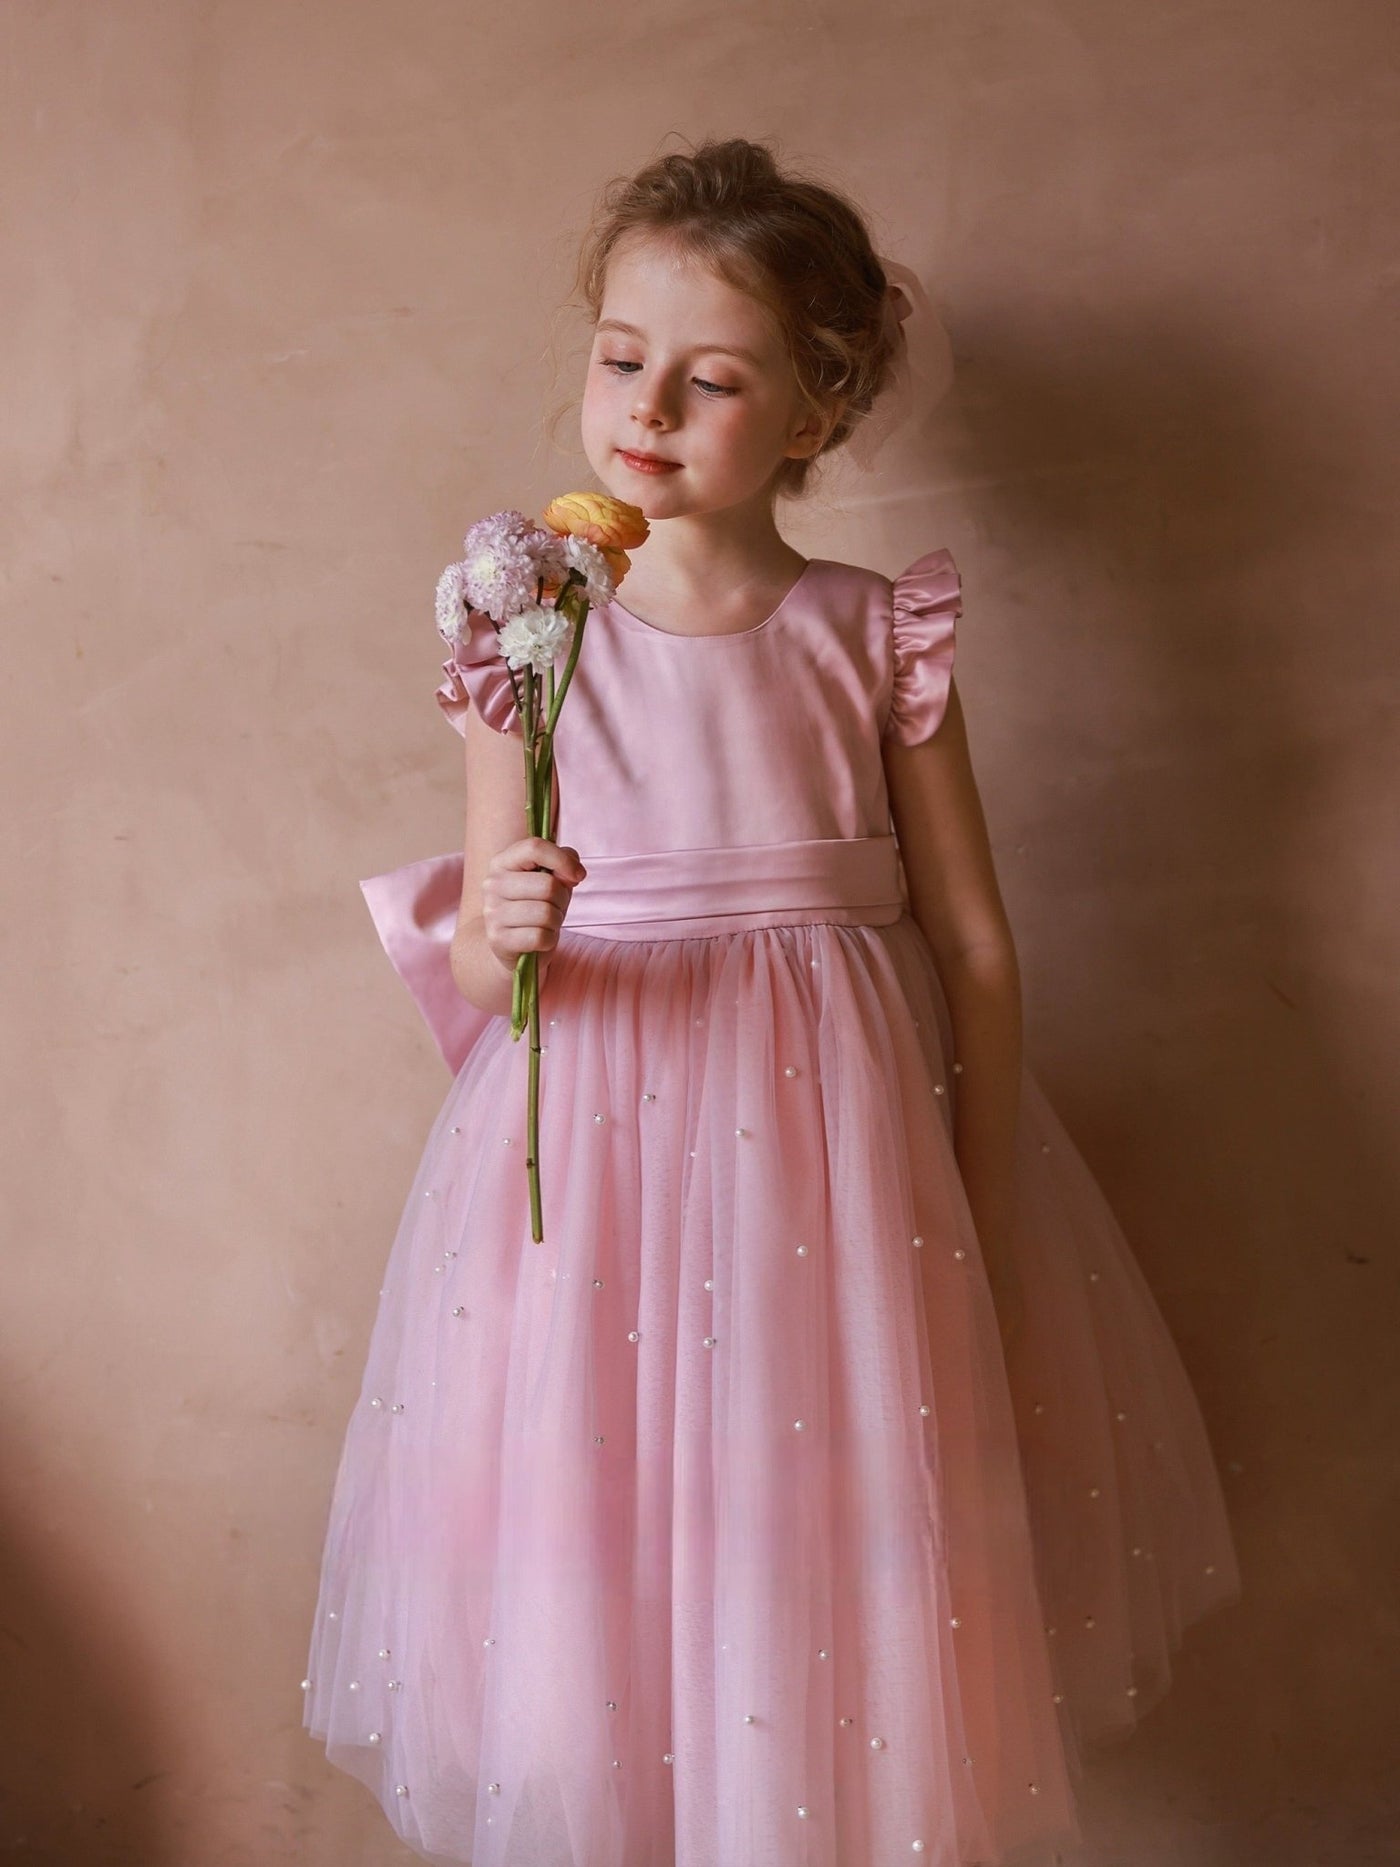 Charming Blush Pink Flower Girl Dress with Pearl Accents and Bow Detail – Plus Size - WonderlandByLilian